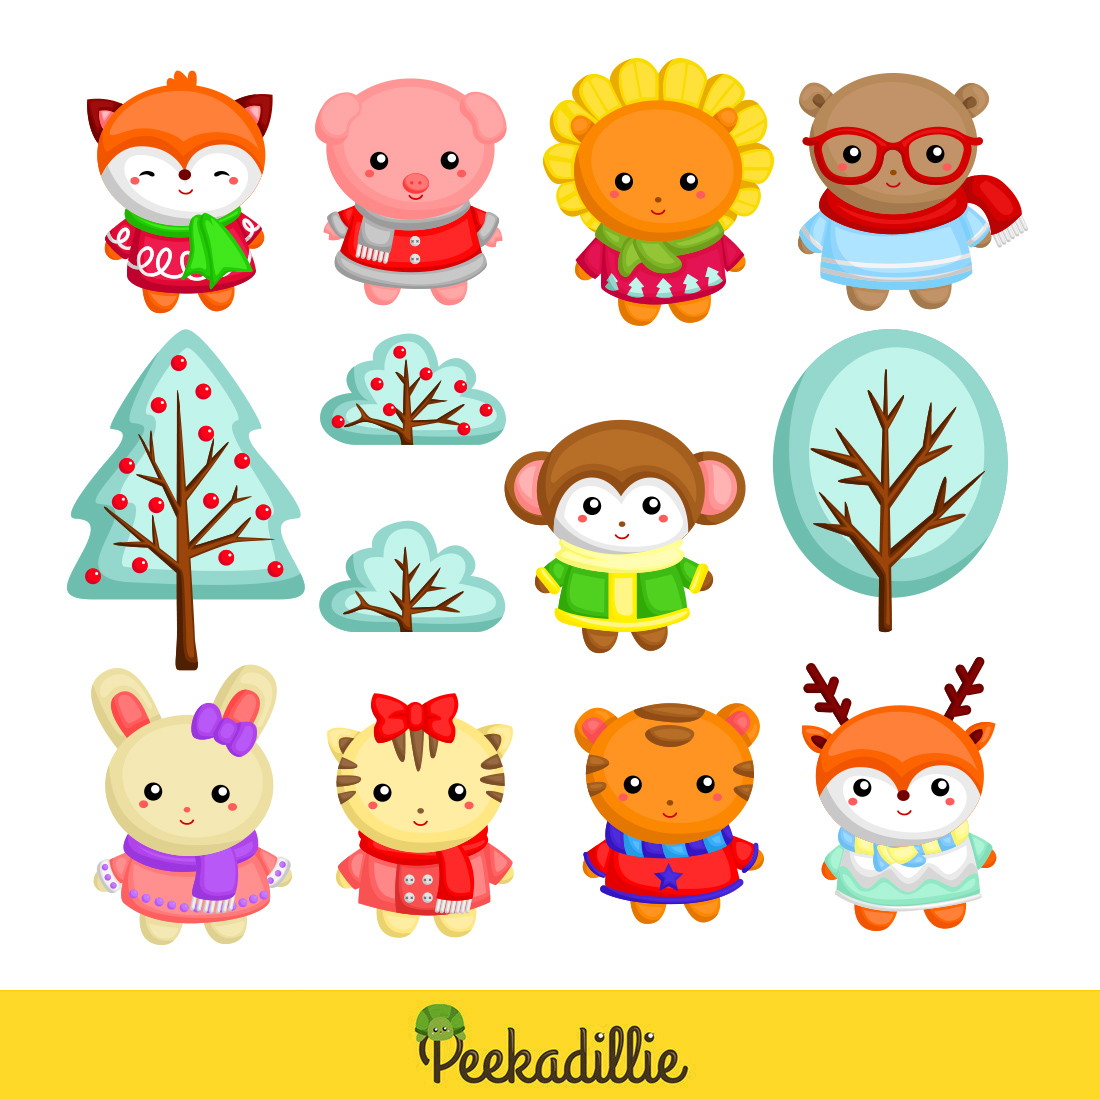 Cute and Funny Winter Animal Holiday Season Christmas Nature Monkey Rabbit Raindeer Tiger Cat Squirrel Fox Bear Cartoon Illustration Vector Clipart Sticker Background Decoration preview image.